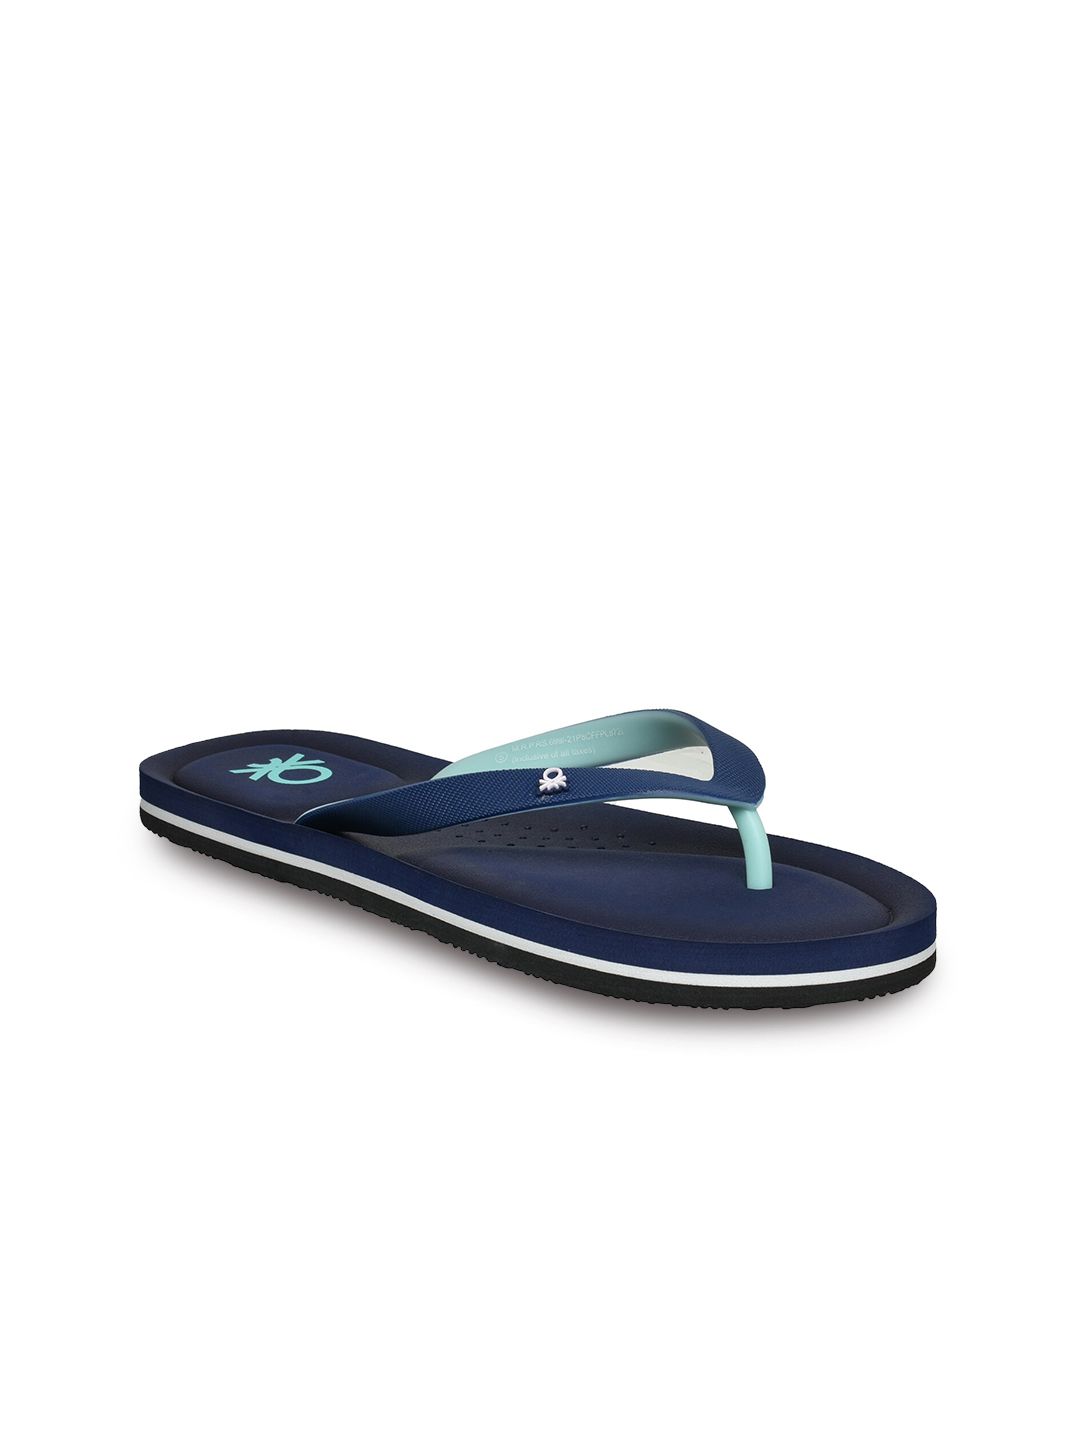 United Colors of Benetton Women Navy Blue & Sea Green Thong Flip-Flops Price in India